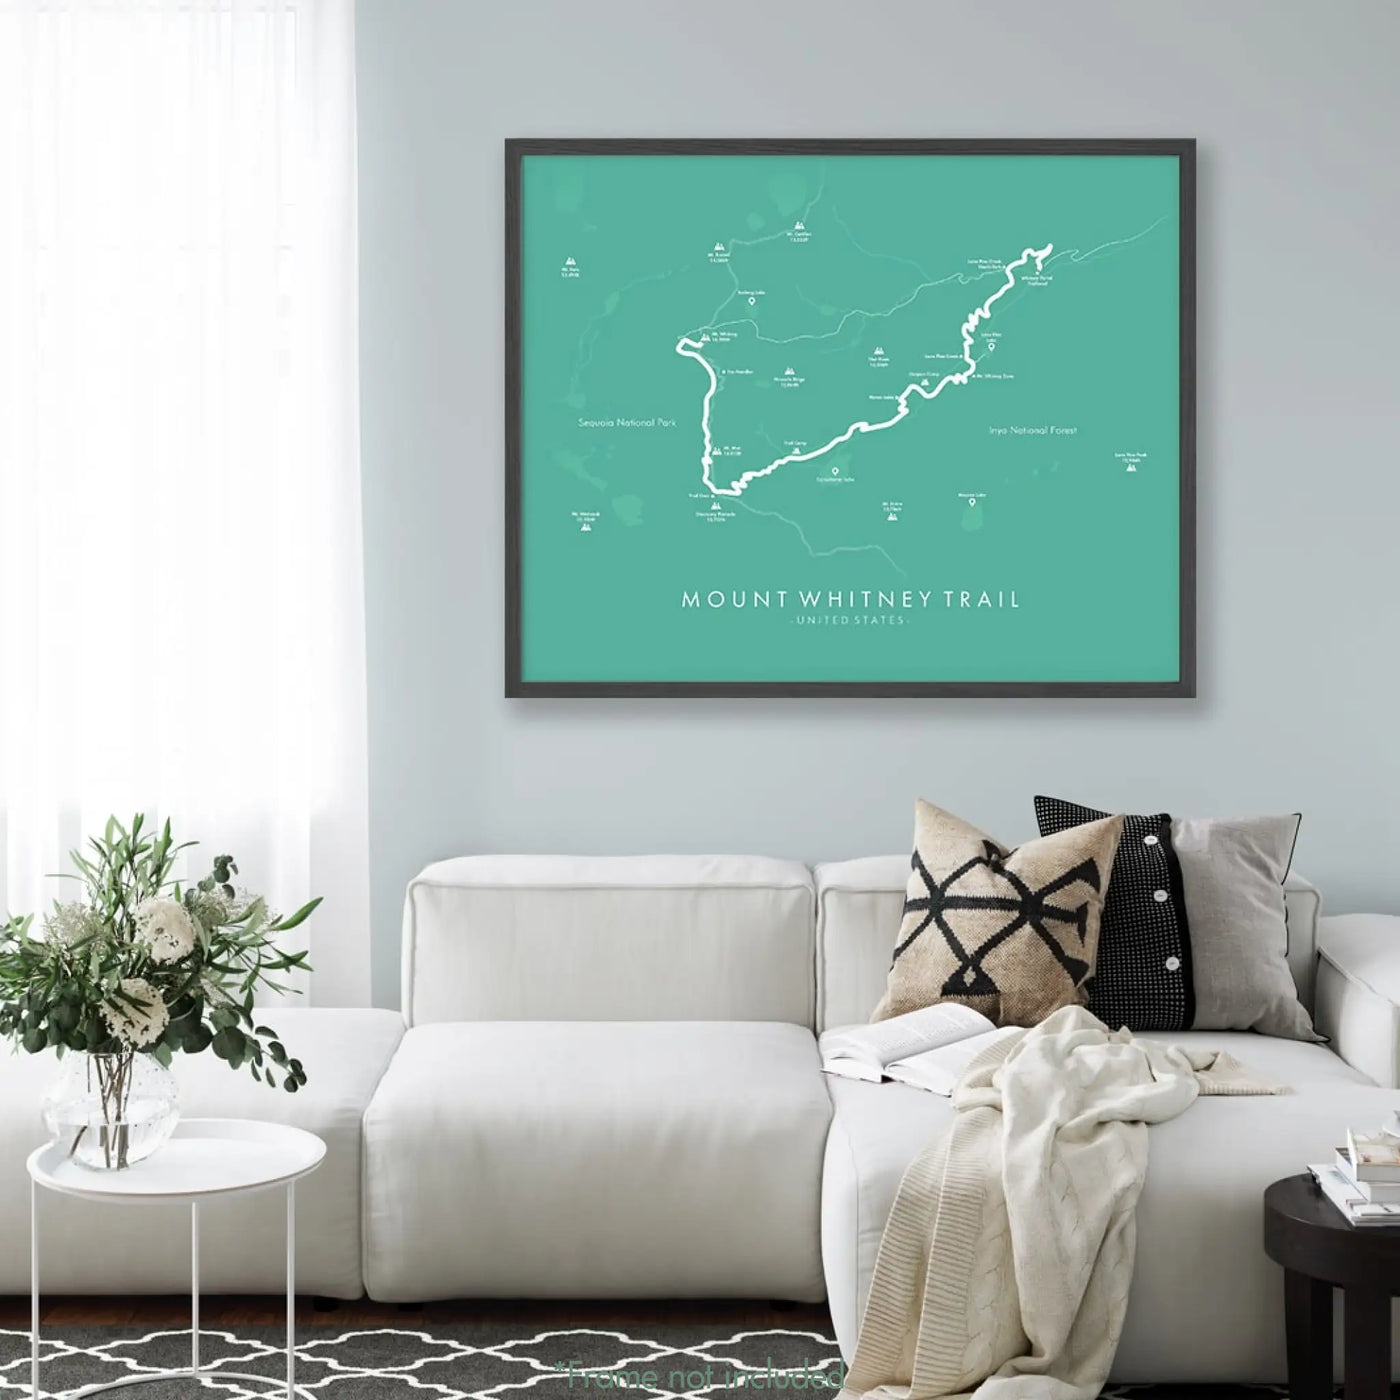 Trail Poster of Mount Whitney Trail - Teal Mockup